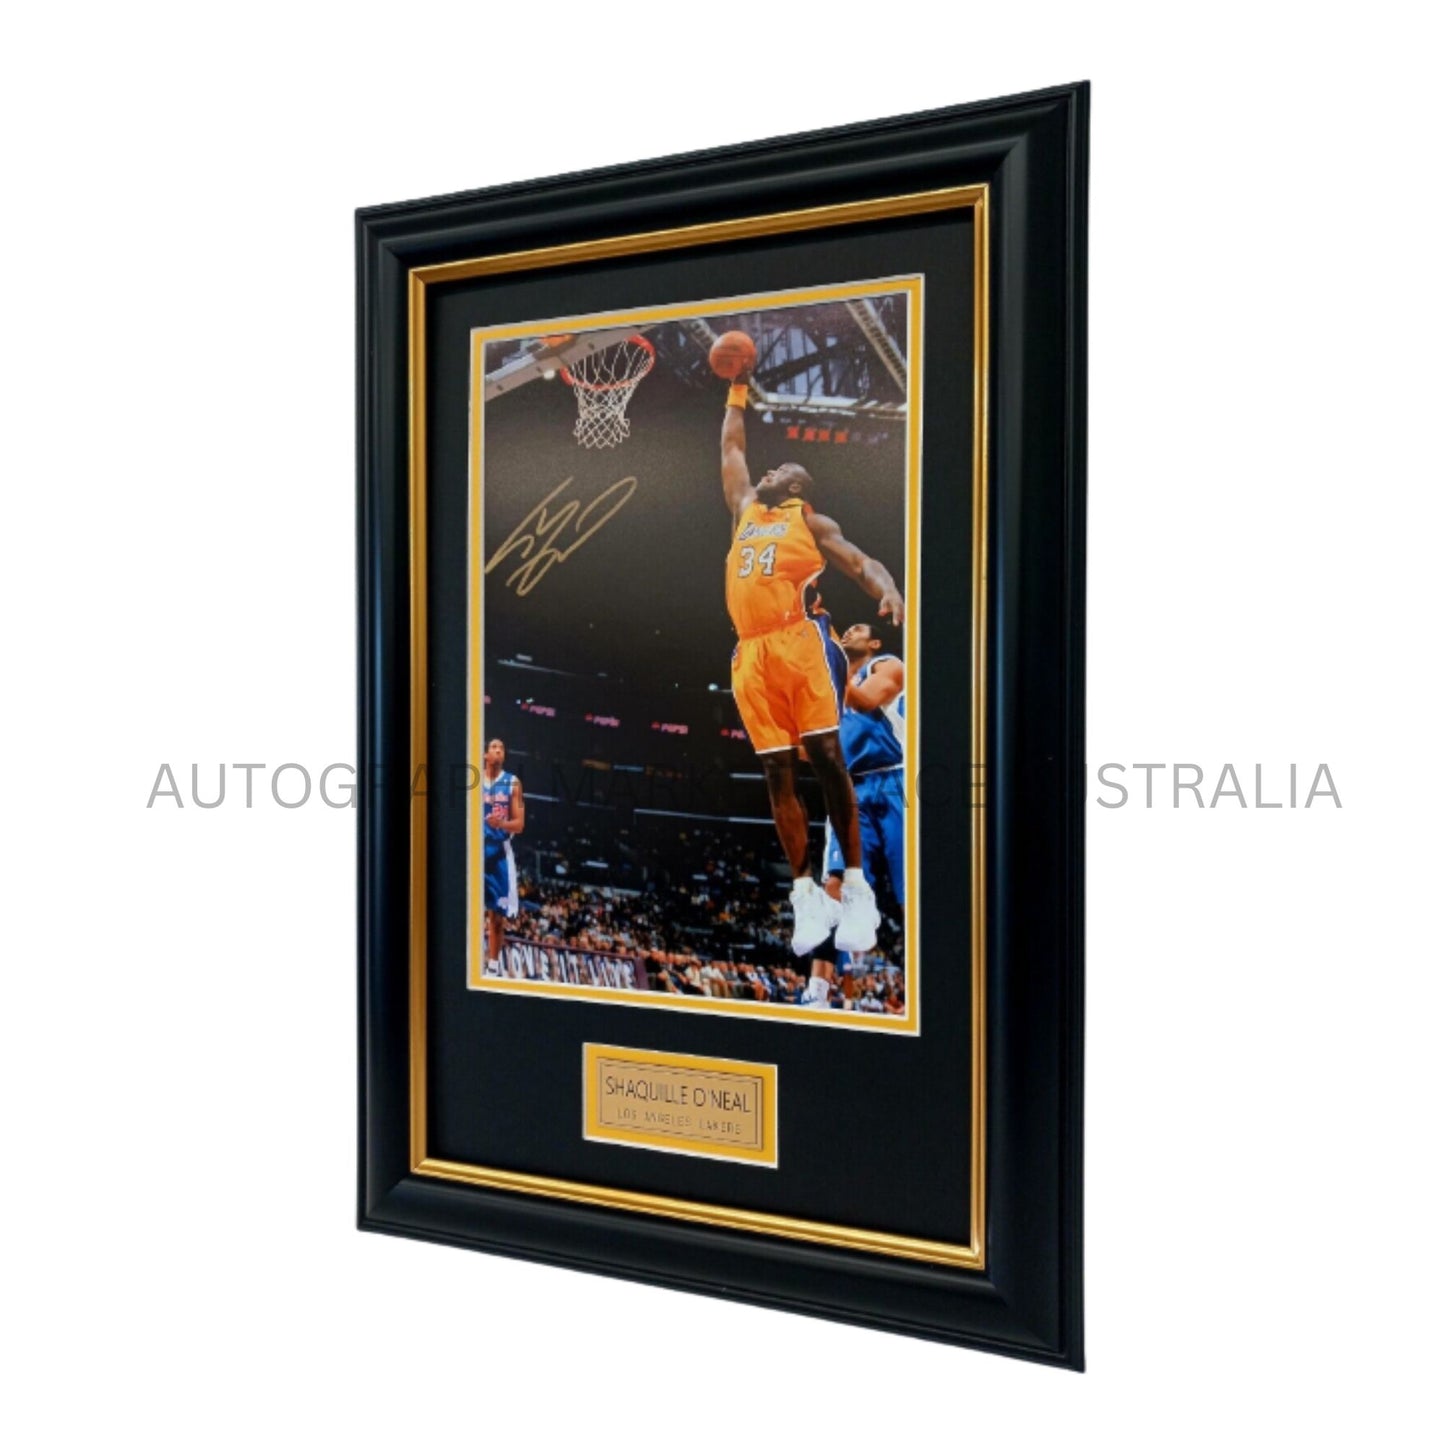 Shaquille O'Neal LA LAKERS Action Photo Signed Framed Memorabilia